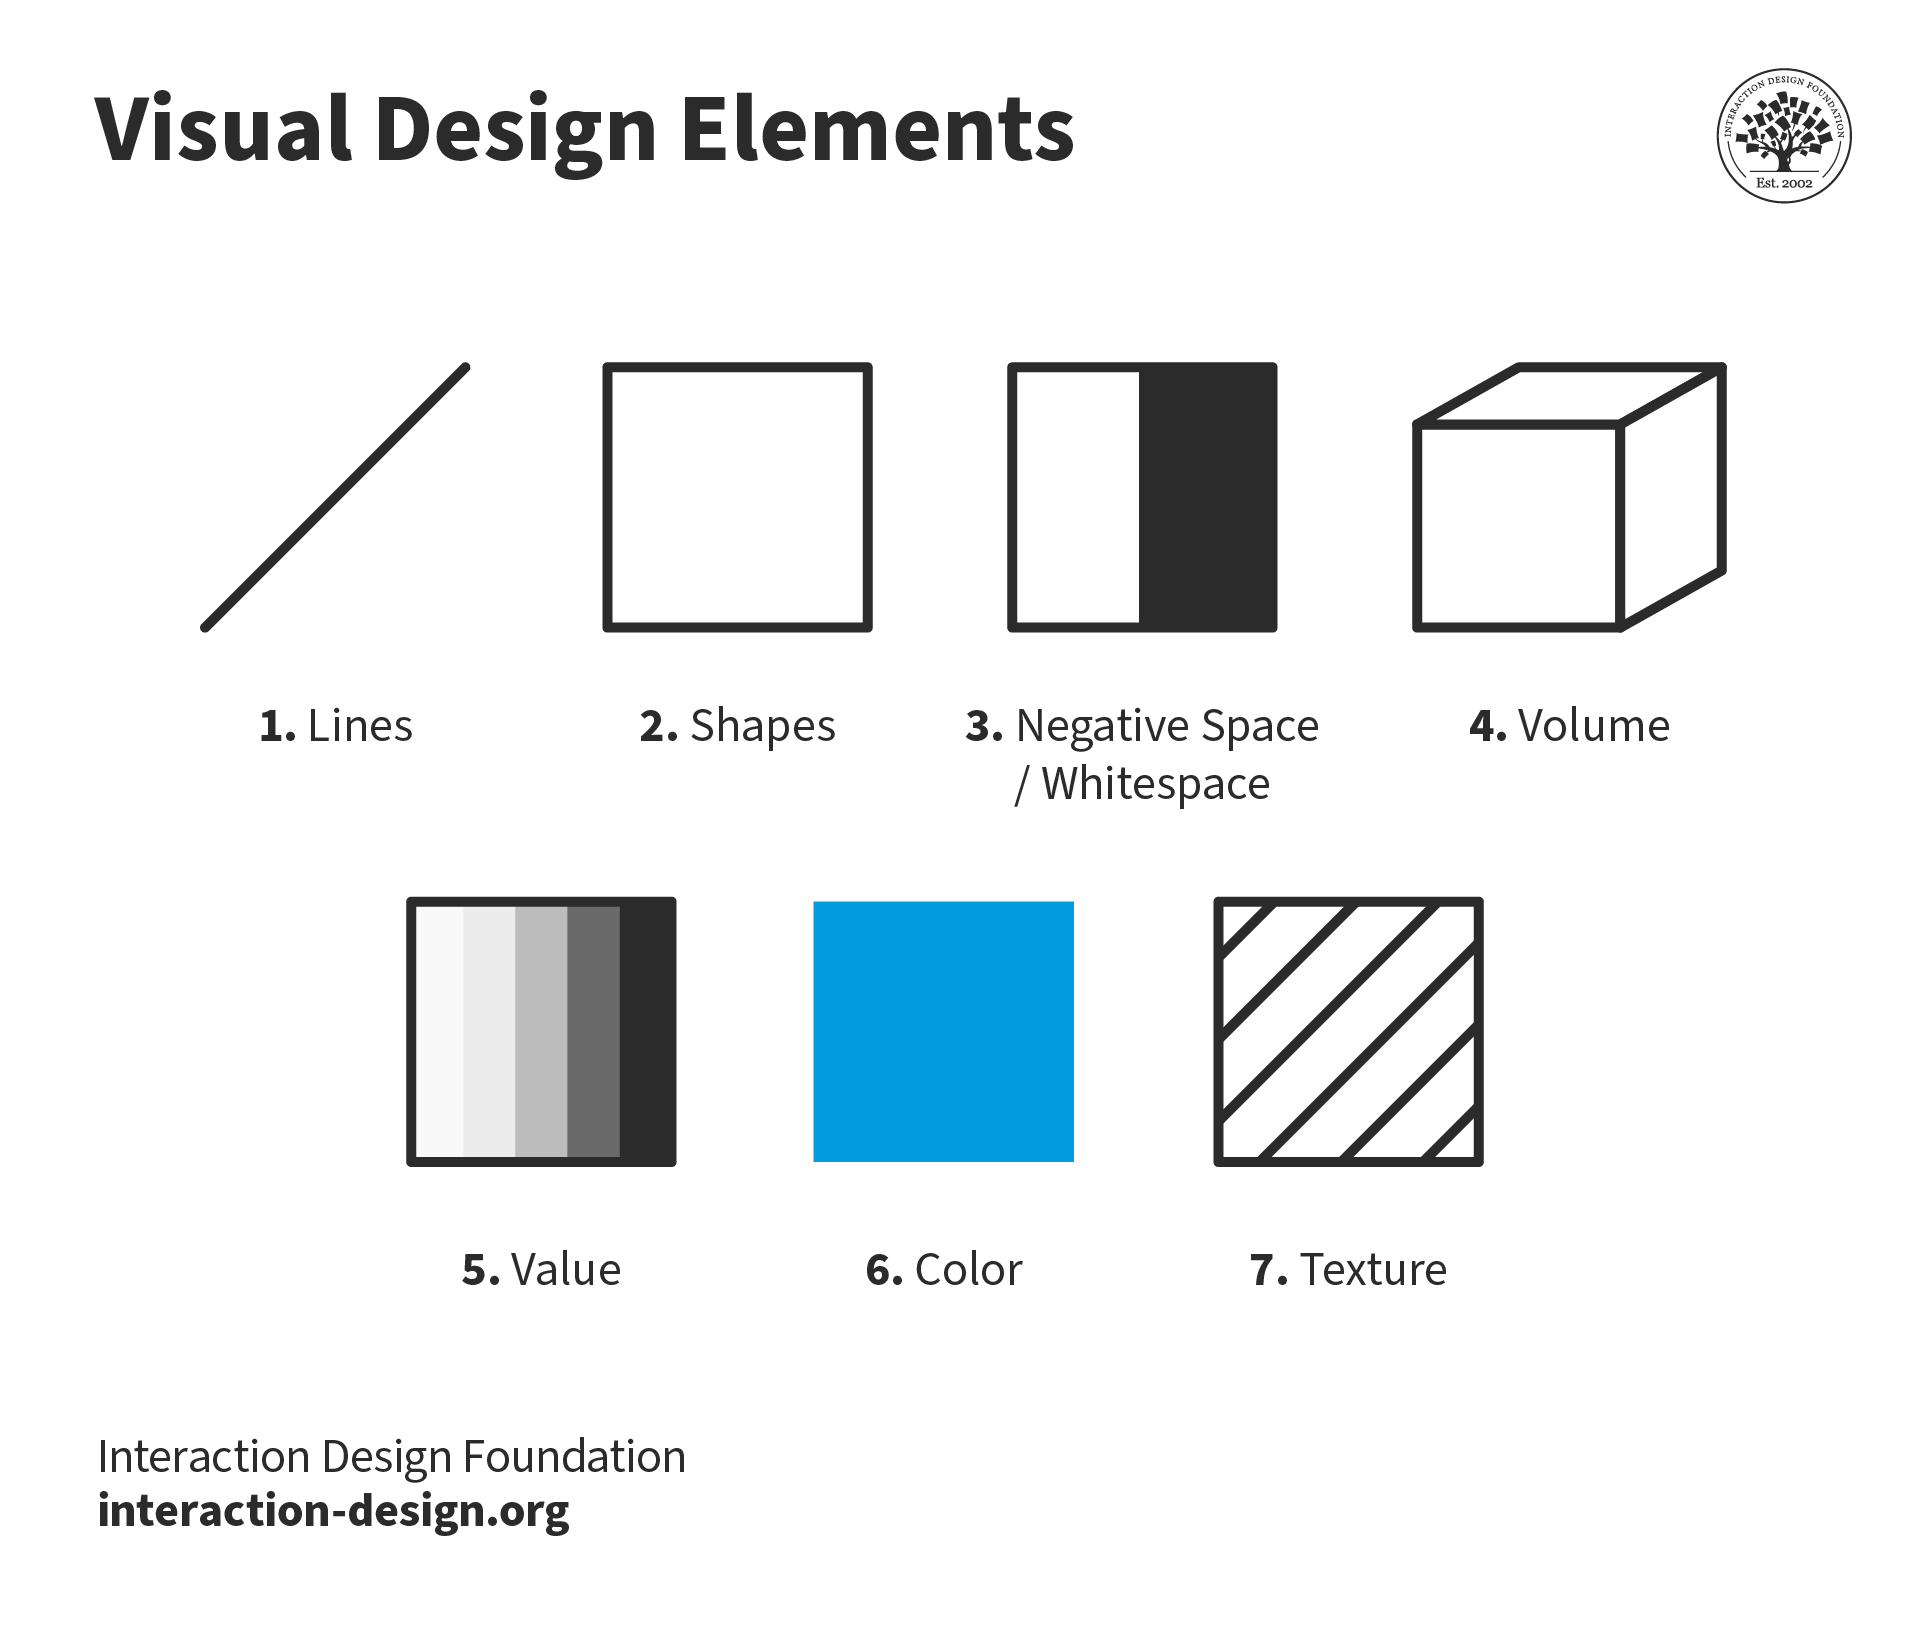 Seven elements of visual design: Lines, Shapes, Negative Space/Whitespace, Volume, Value, Color and Texture.